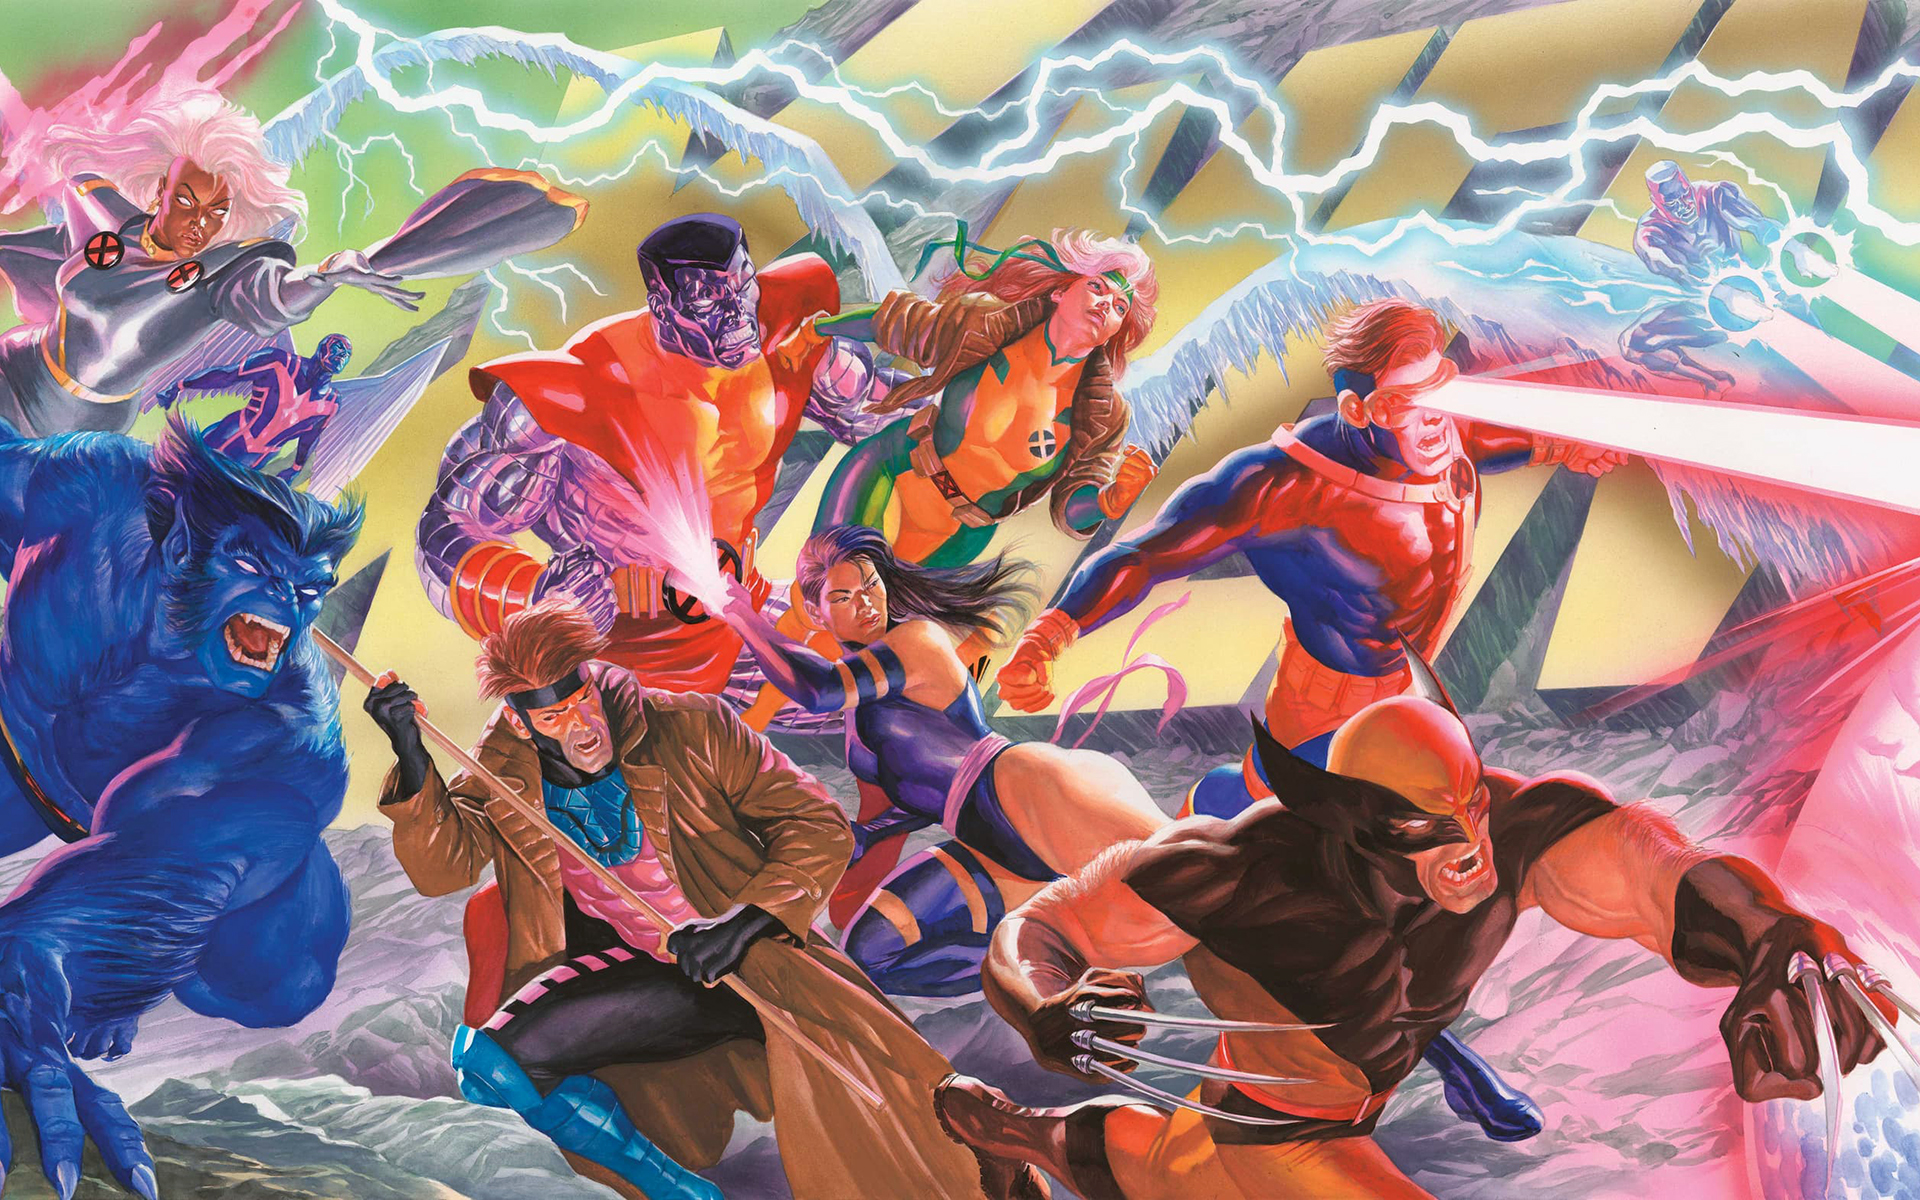 Wolverine, Cyclops, Psylocke, Gambit, Beast, Rogue, Storm and Colossus charge toward Magneto in artwork by Alex Ross interpreting Jim Lee’s 1991 X-Men #1 cover